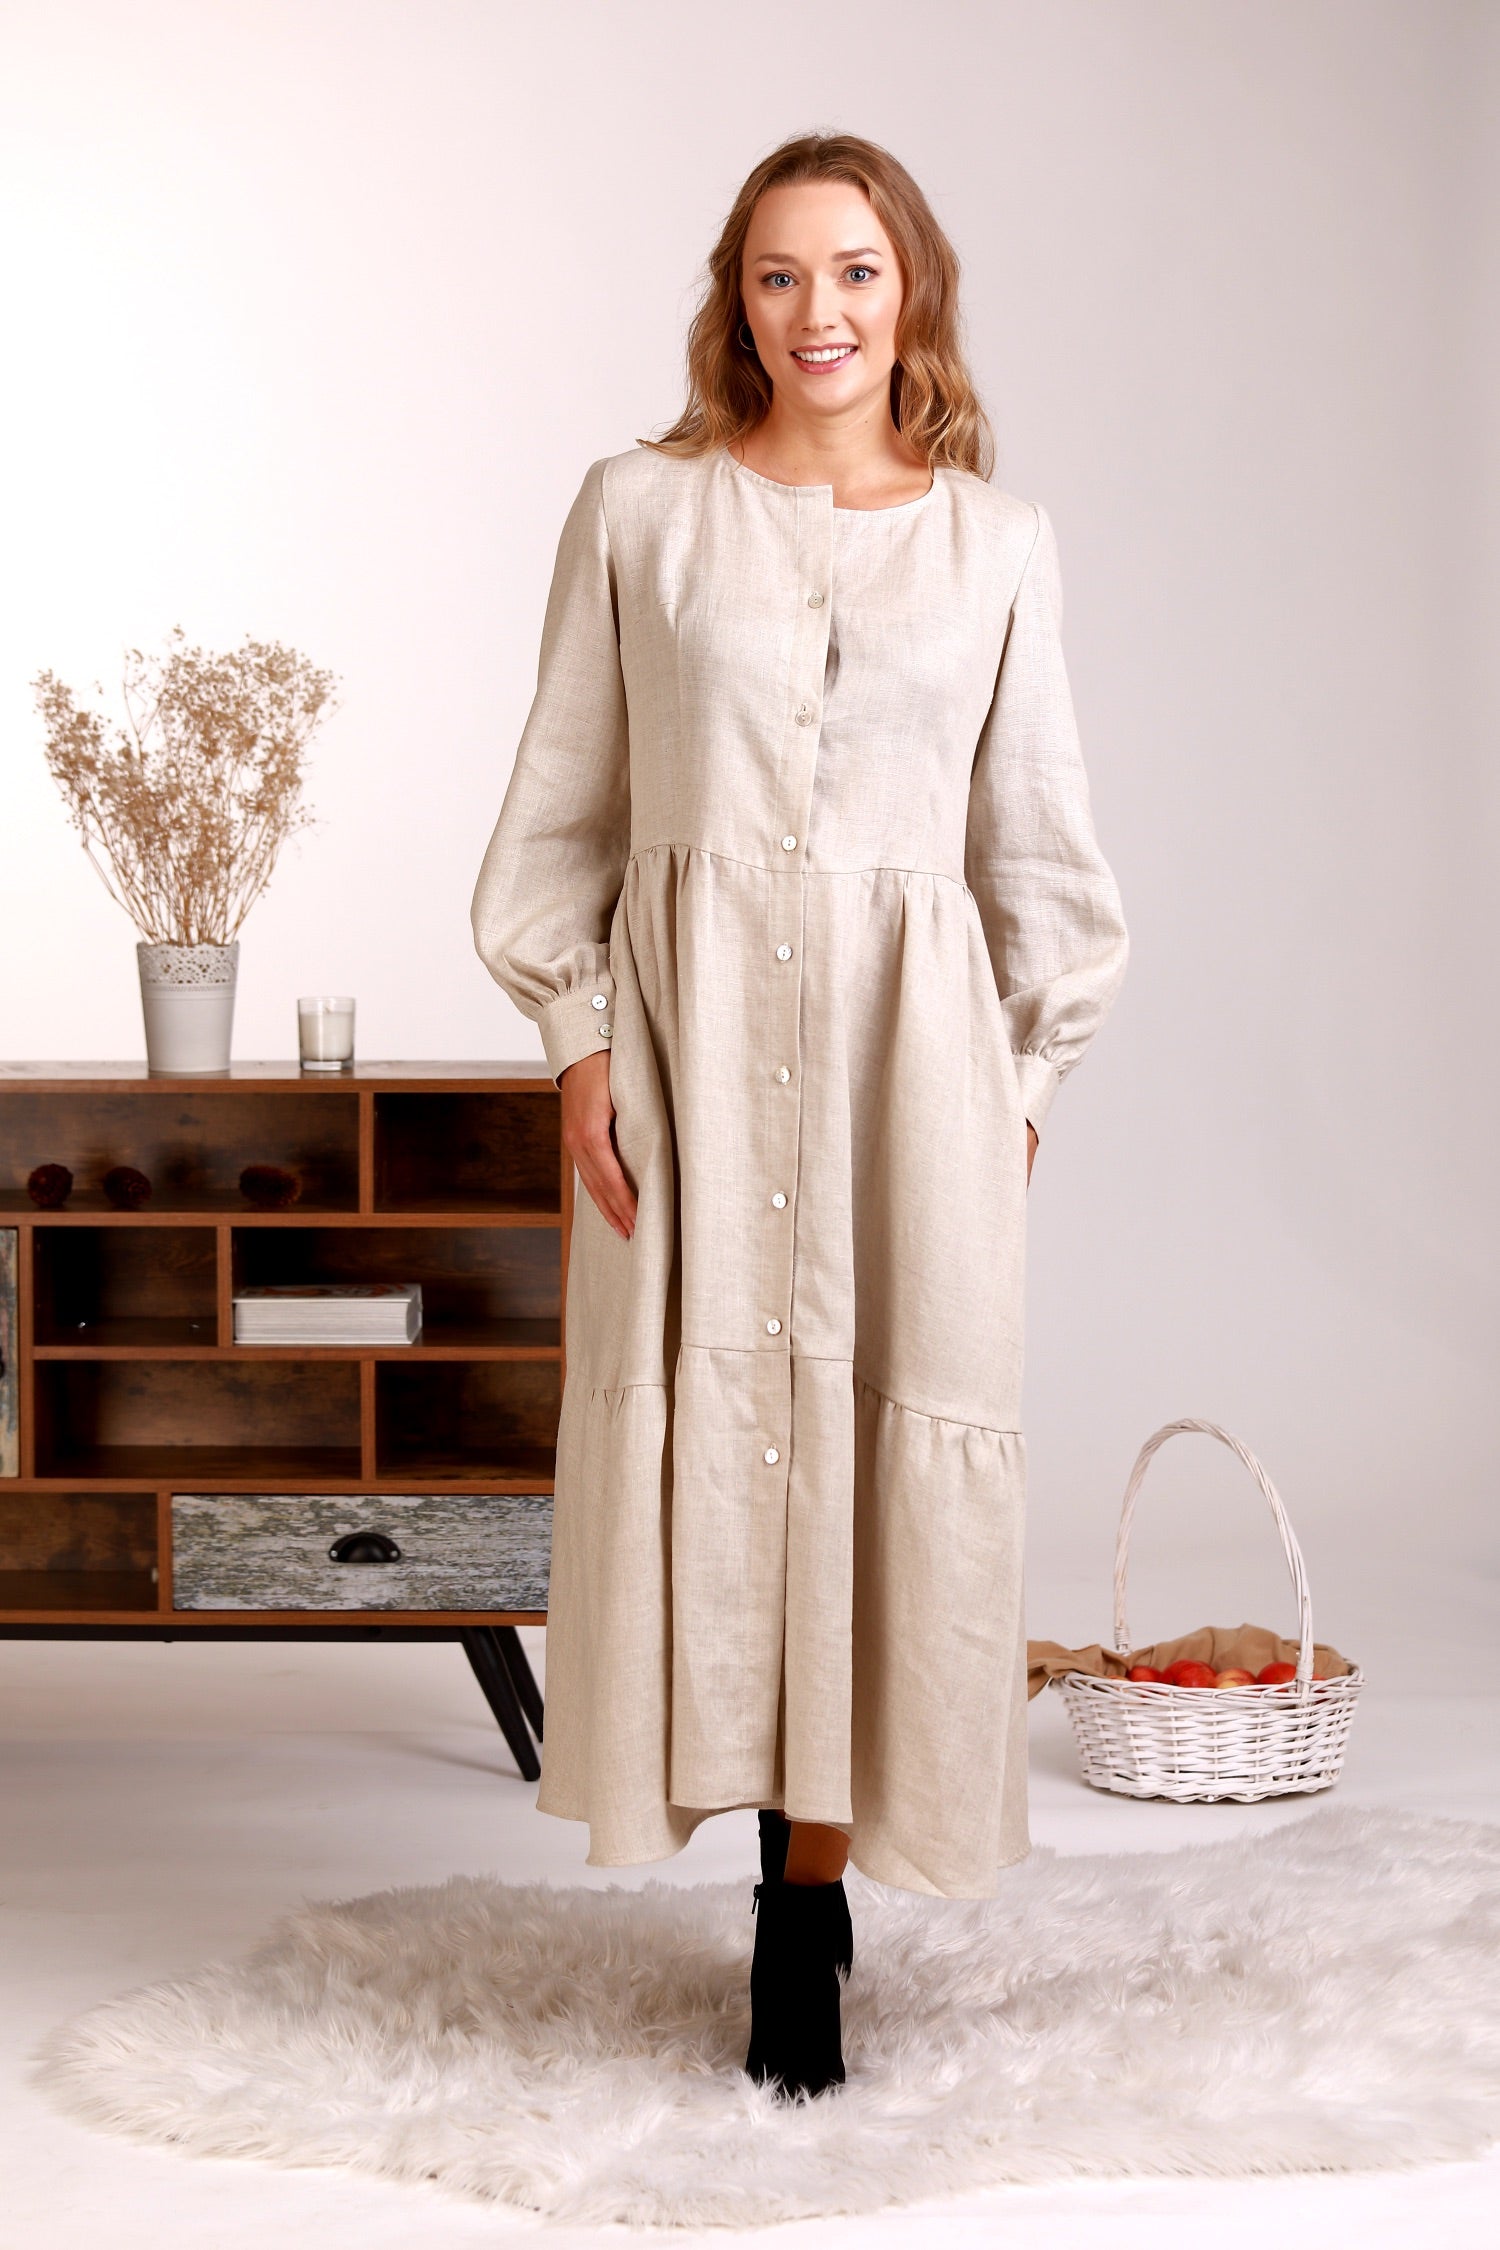 Old Fashioned Linen Dress from NikkaPlace